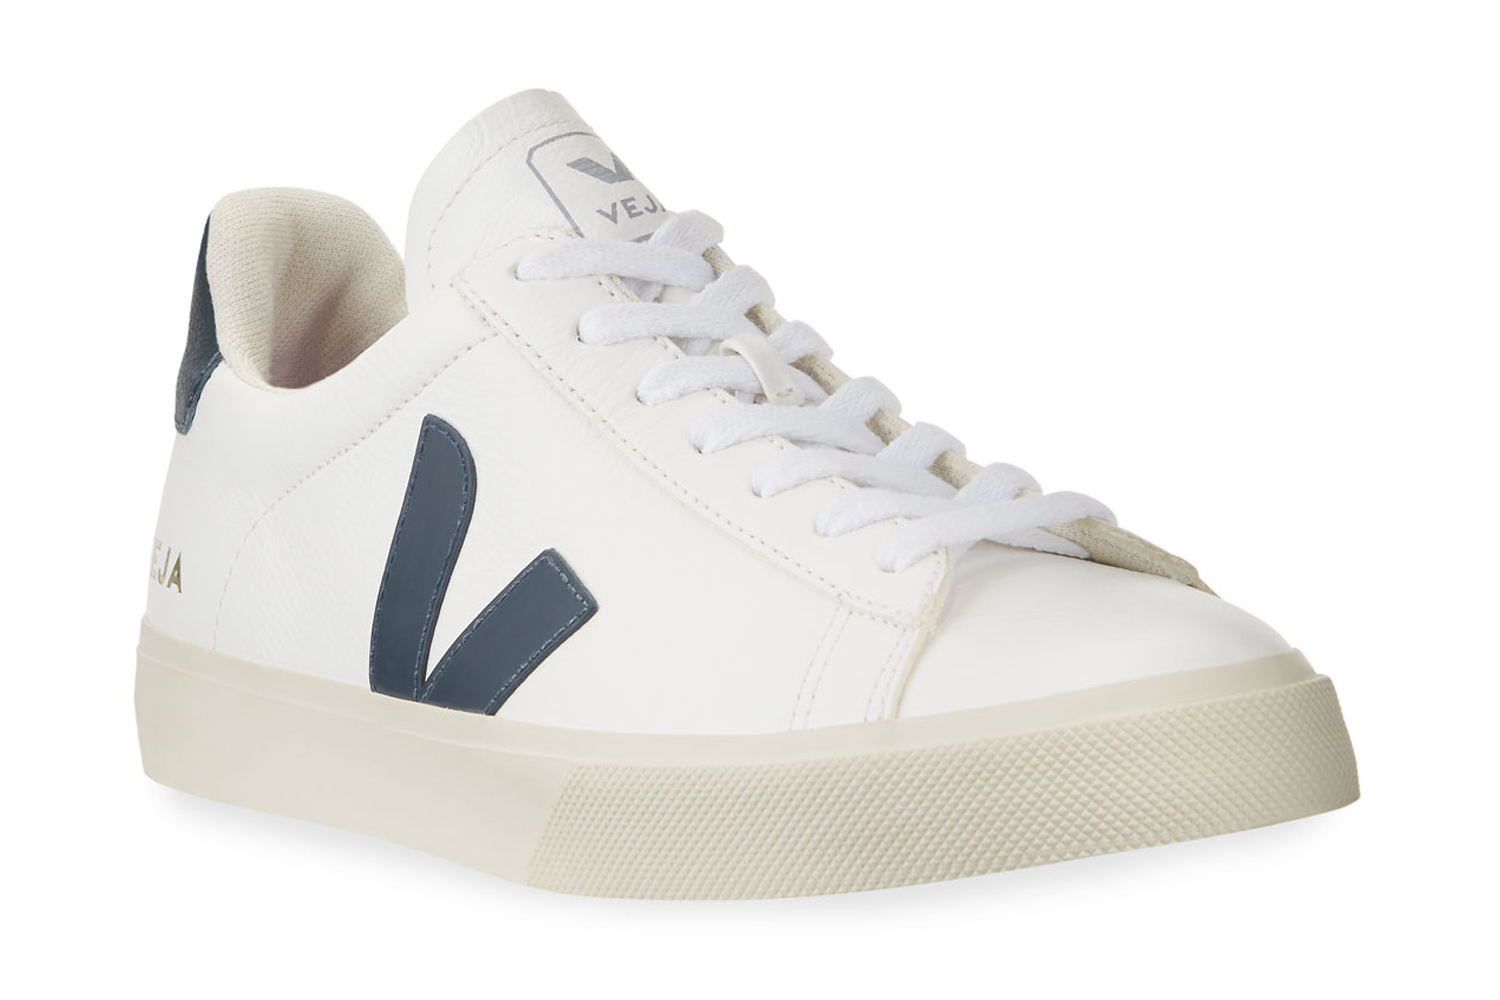 Campo Logo Leather Sneakers
VEJA
$140
